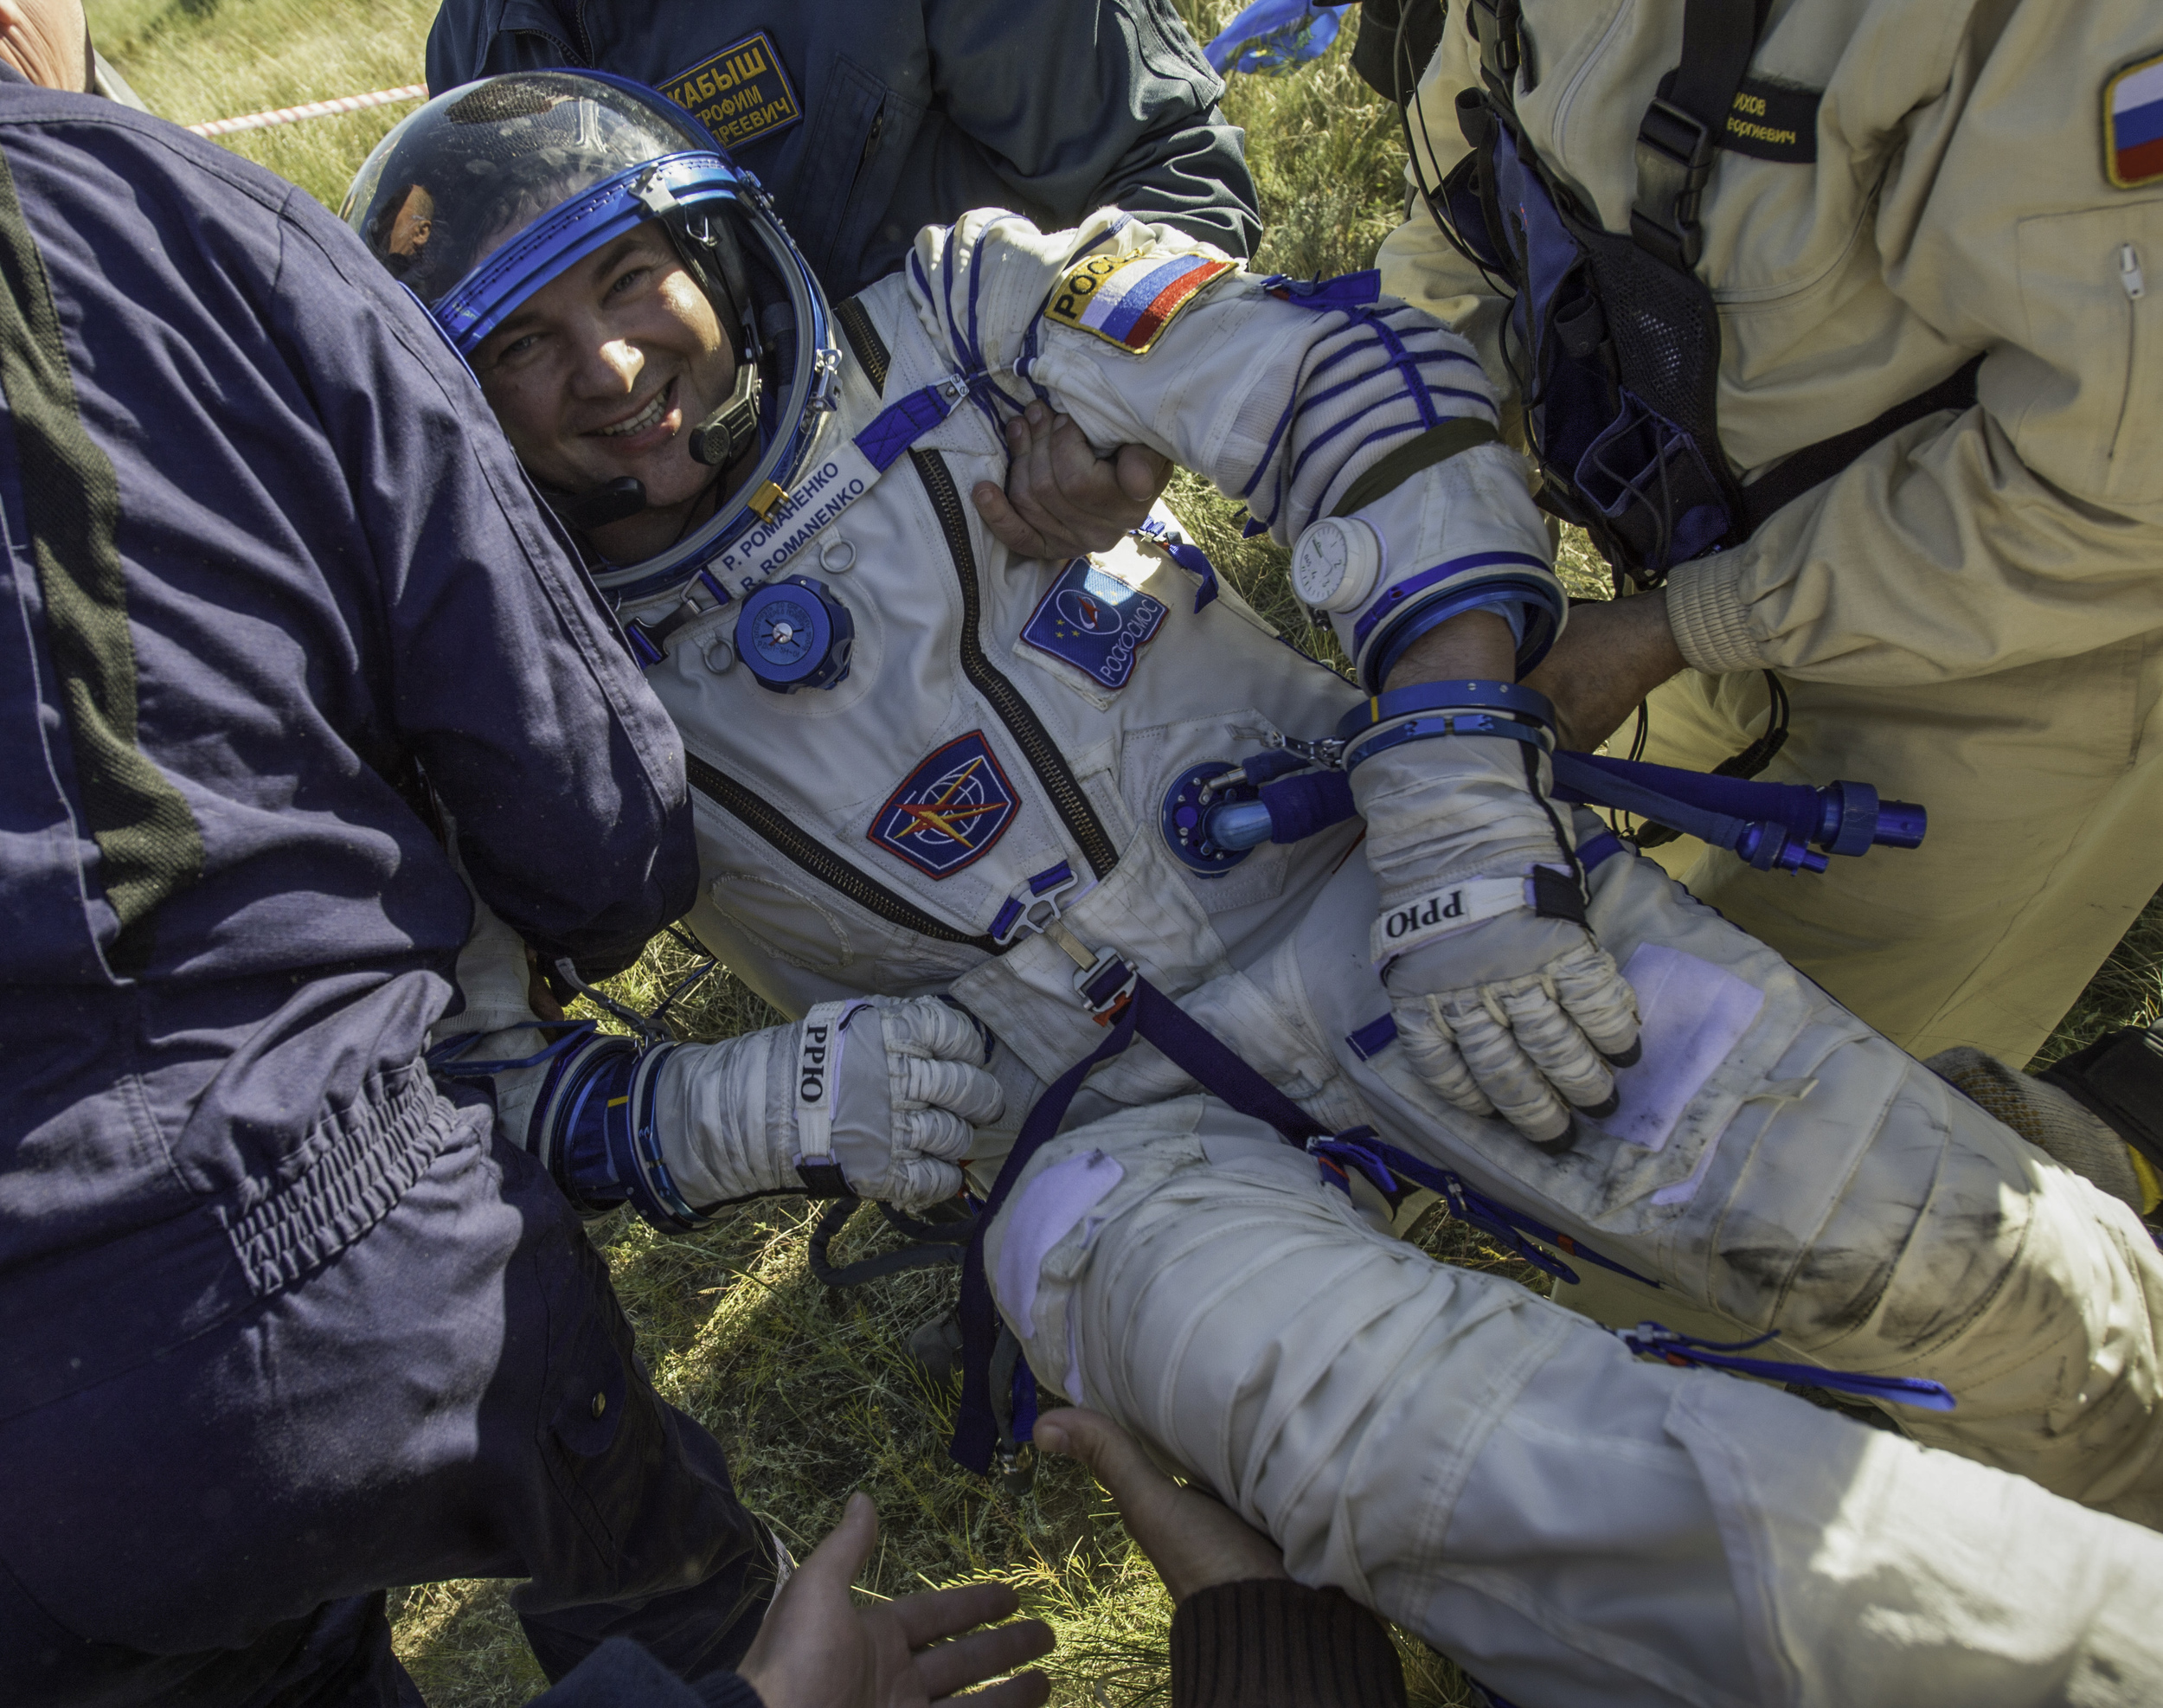  Expedition 35 Flight Engineer and Russian cosmonaut Roman Romanenko is seen smiling as he is carried after being extracted from the Soyuz TMA-07M spacecraft shortly after the capsule landed with Expedition 35 Commander Chris Hadfield of the Canadian